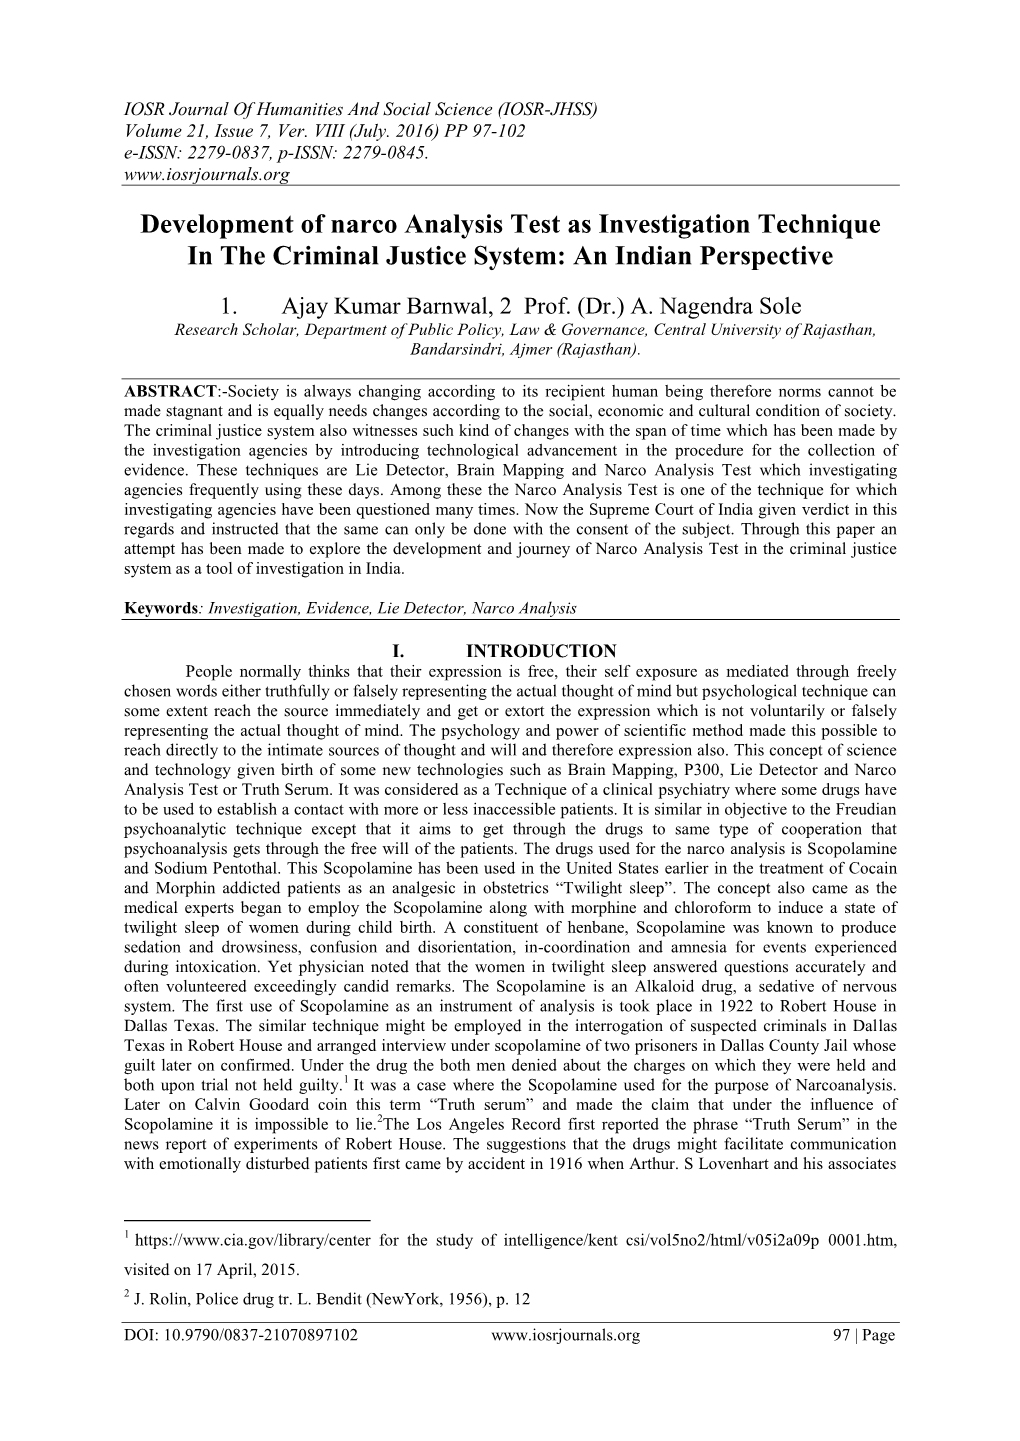 Development of Narco Analysis Test As Investigation Technique in the Criminal Justice System: an Indian Perspective